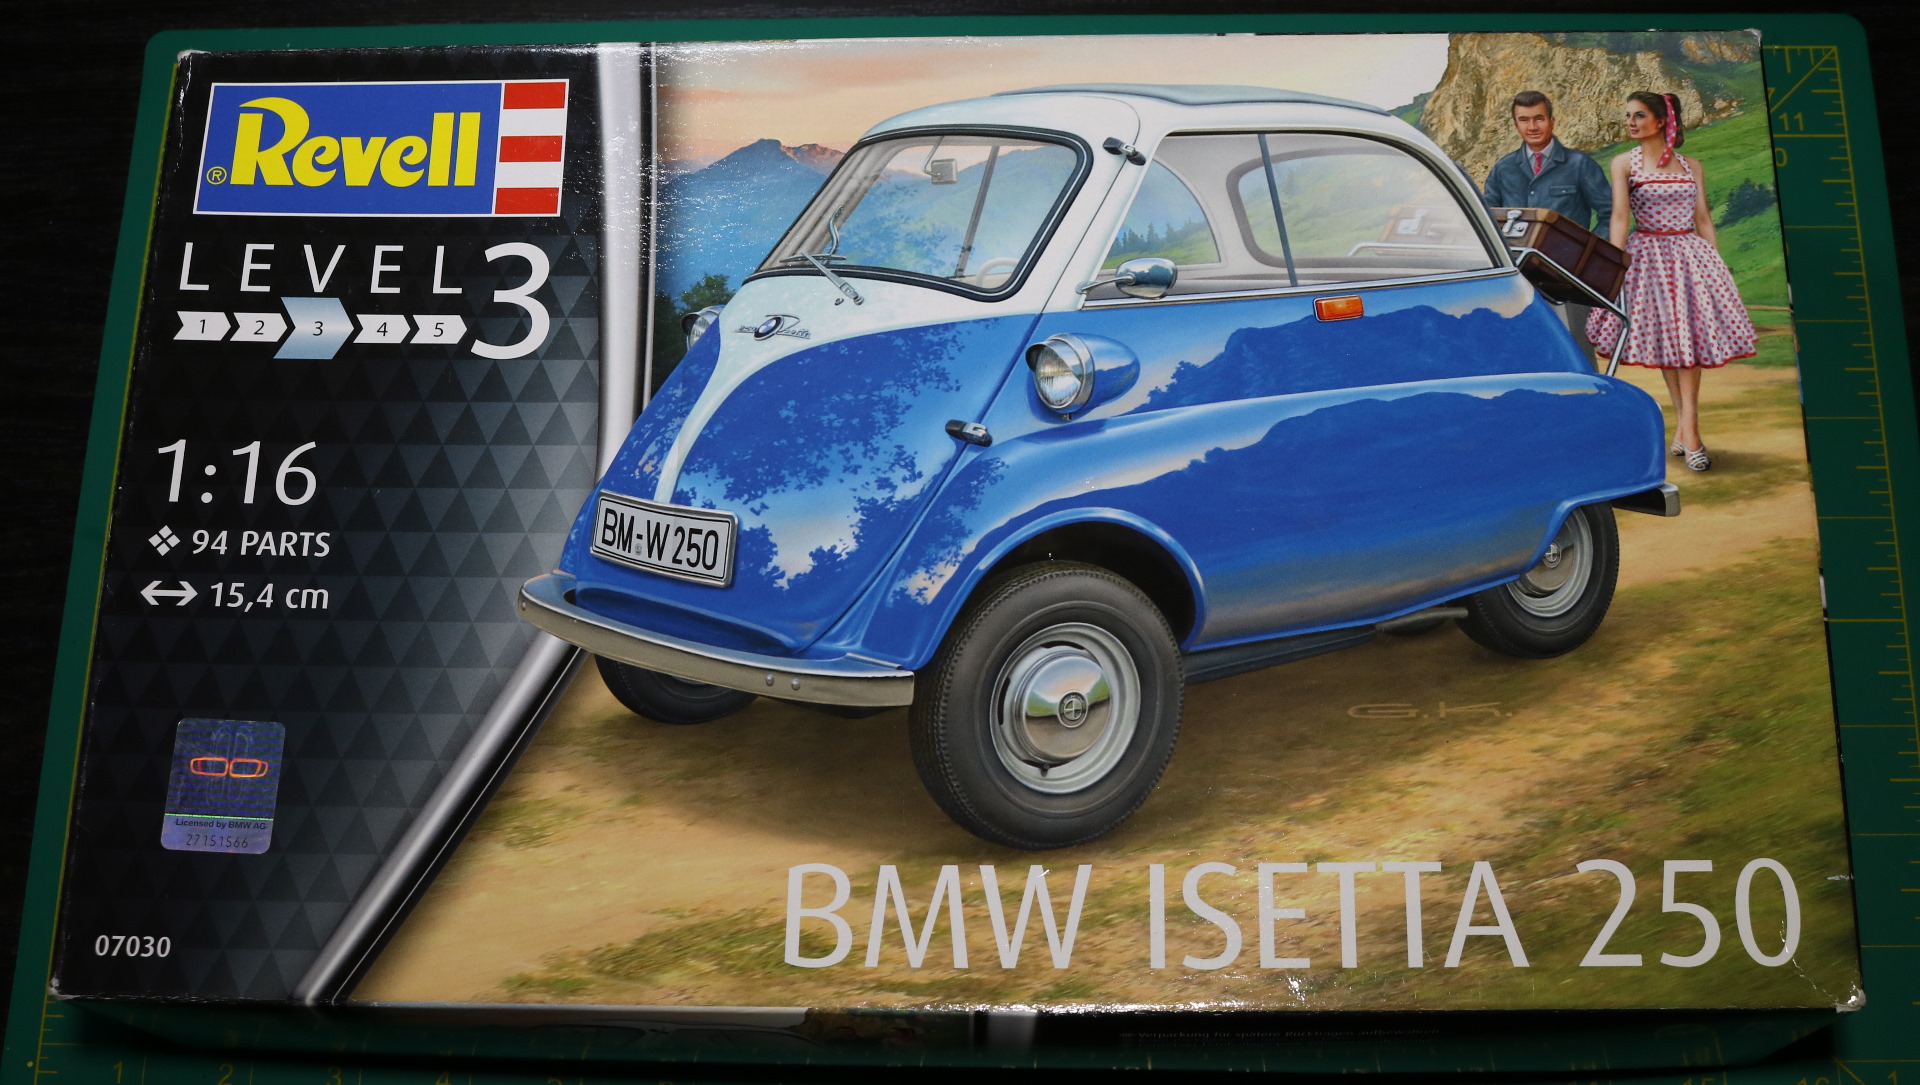 BMW Isetta 250 1/16 scale by Revell